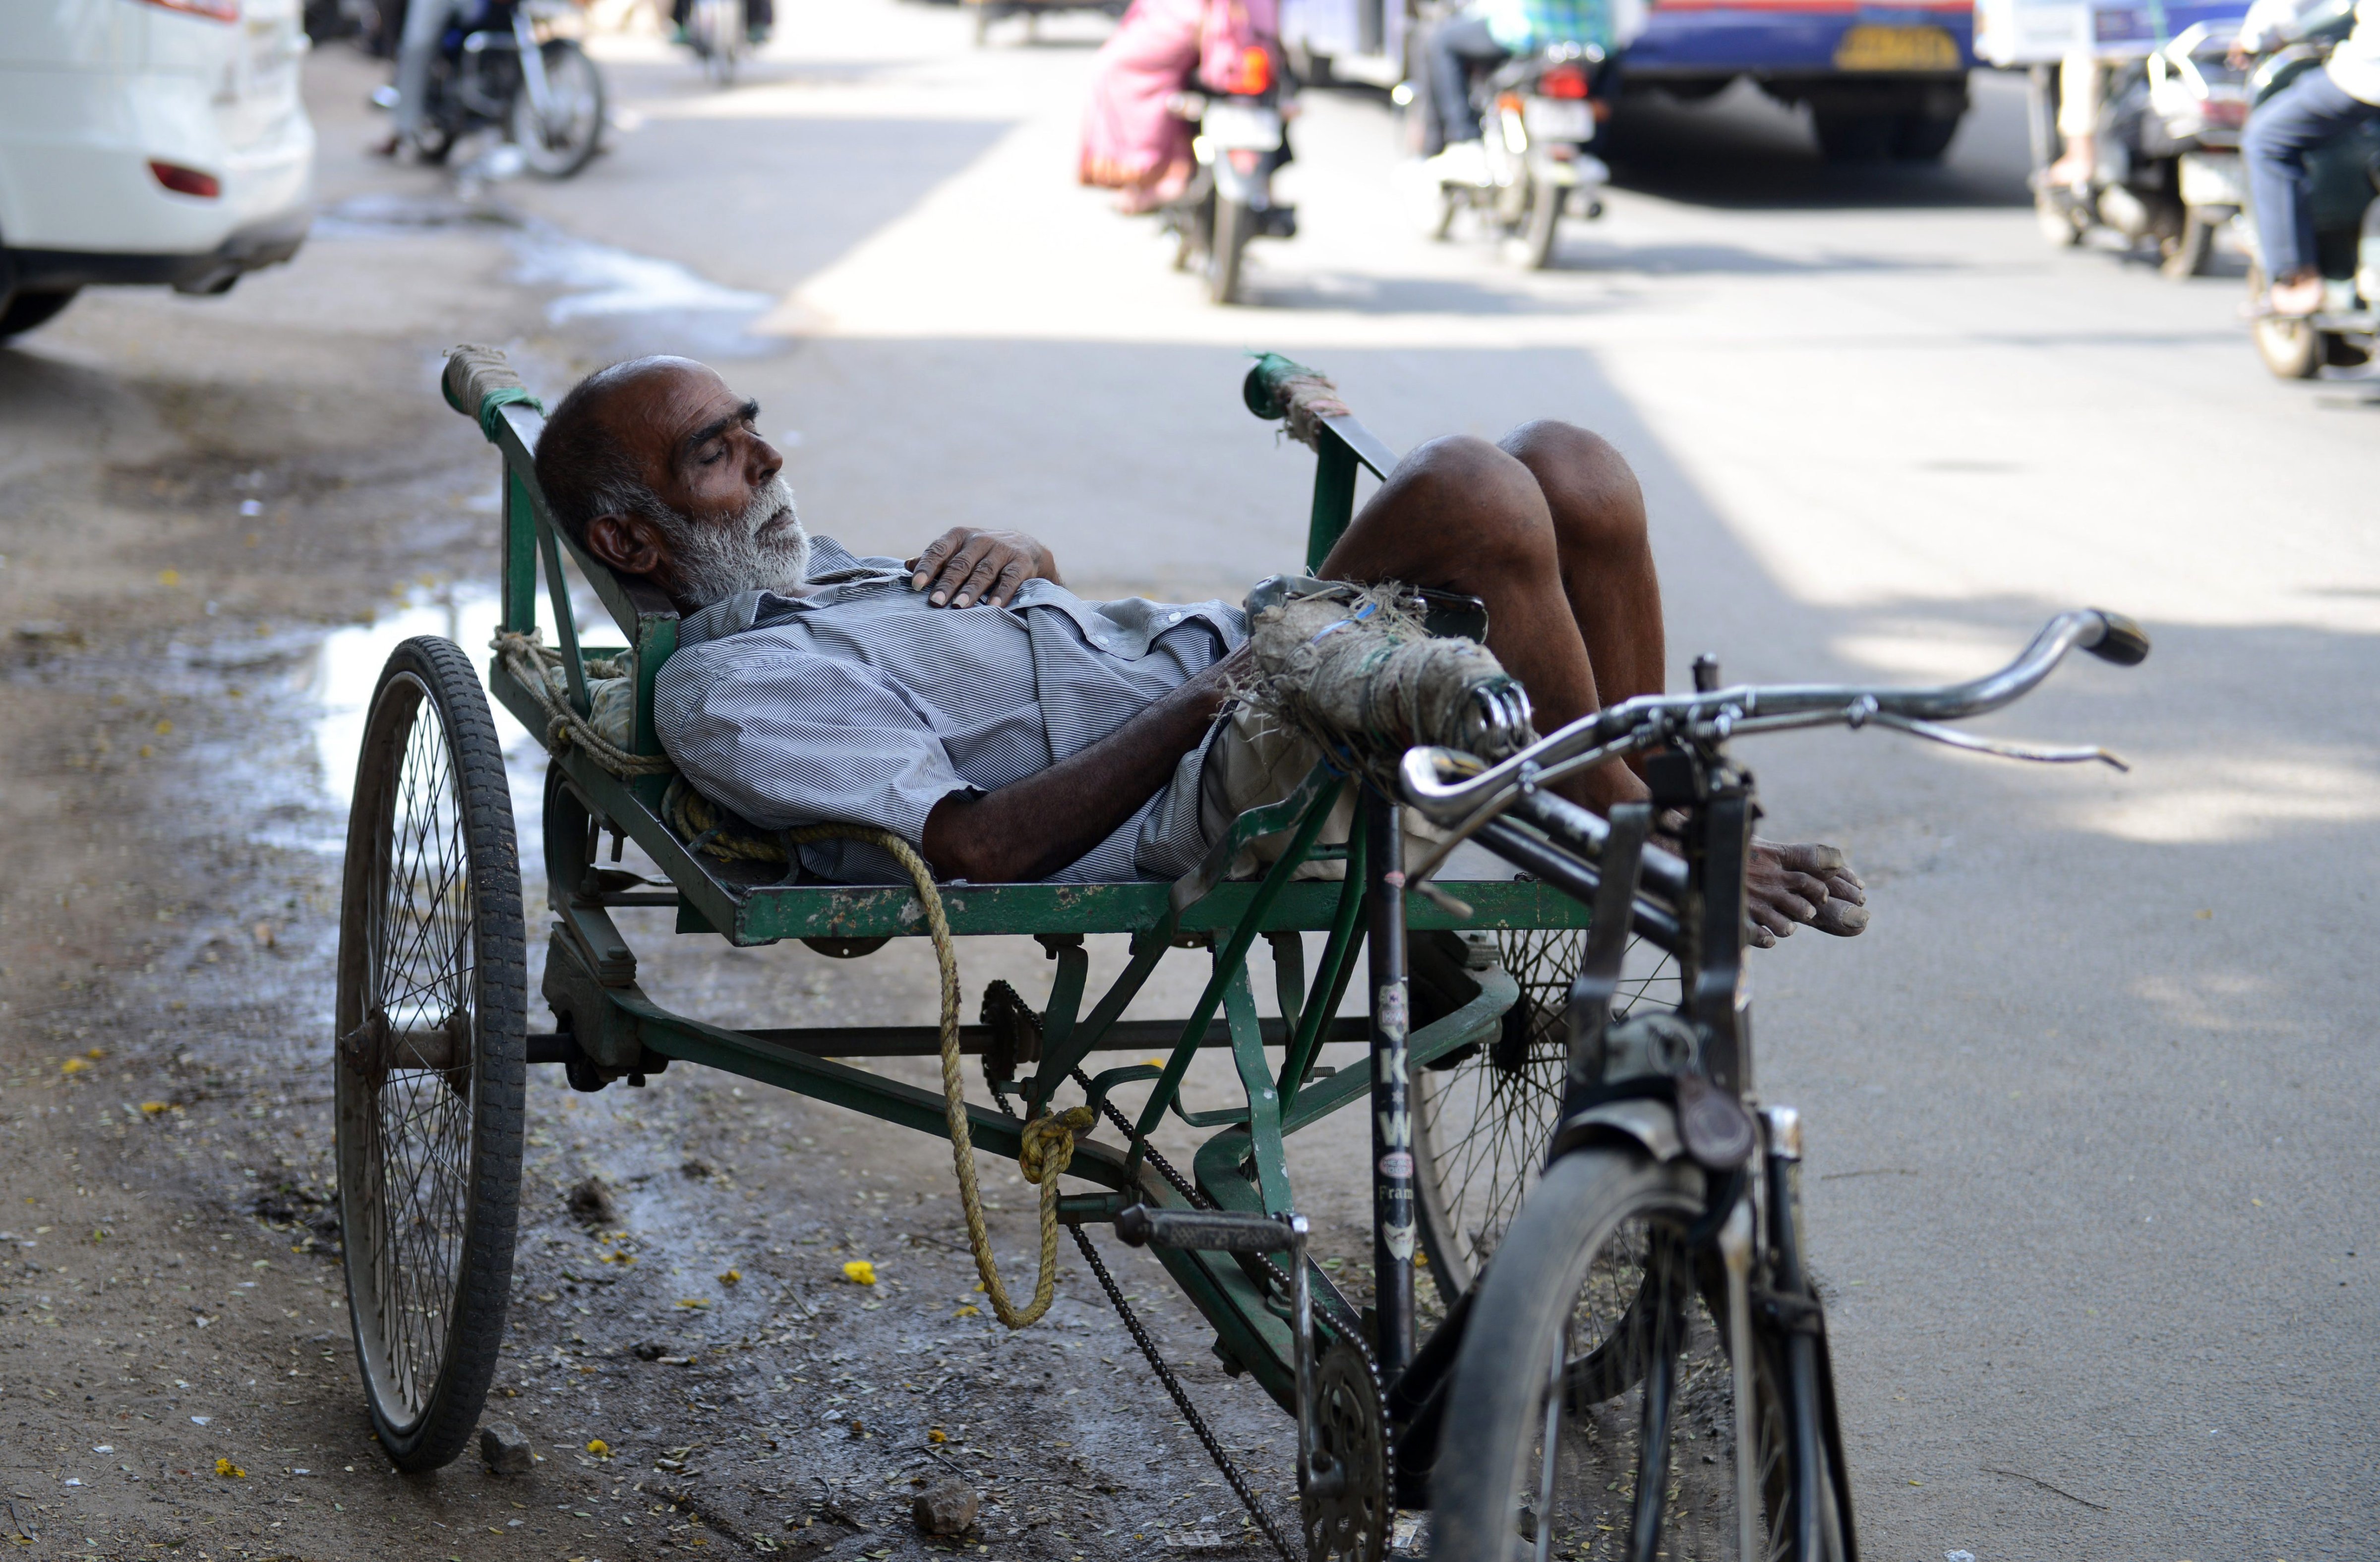 An Indian resident sleeps in the shade on a tricyle at the roadside in Hyderabad on May 22, 2015 (Noah Seelam—AFP/Getty Images)